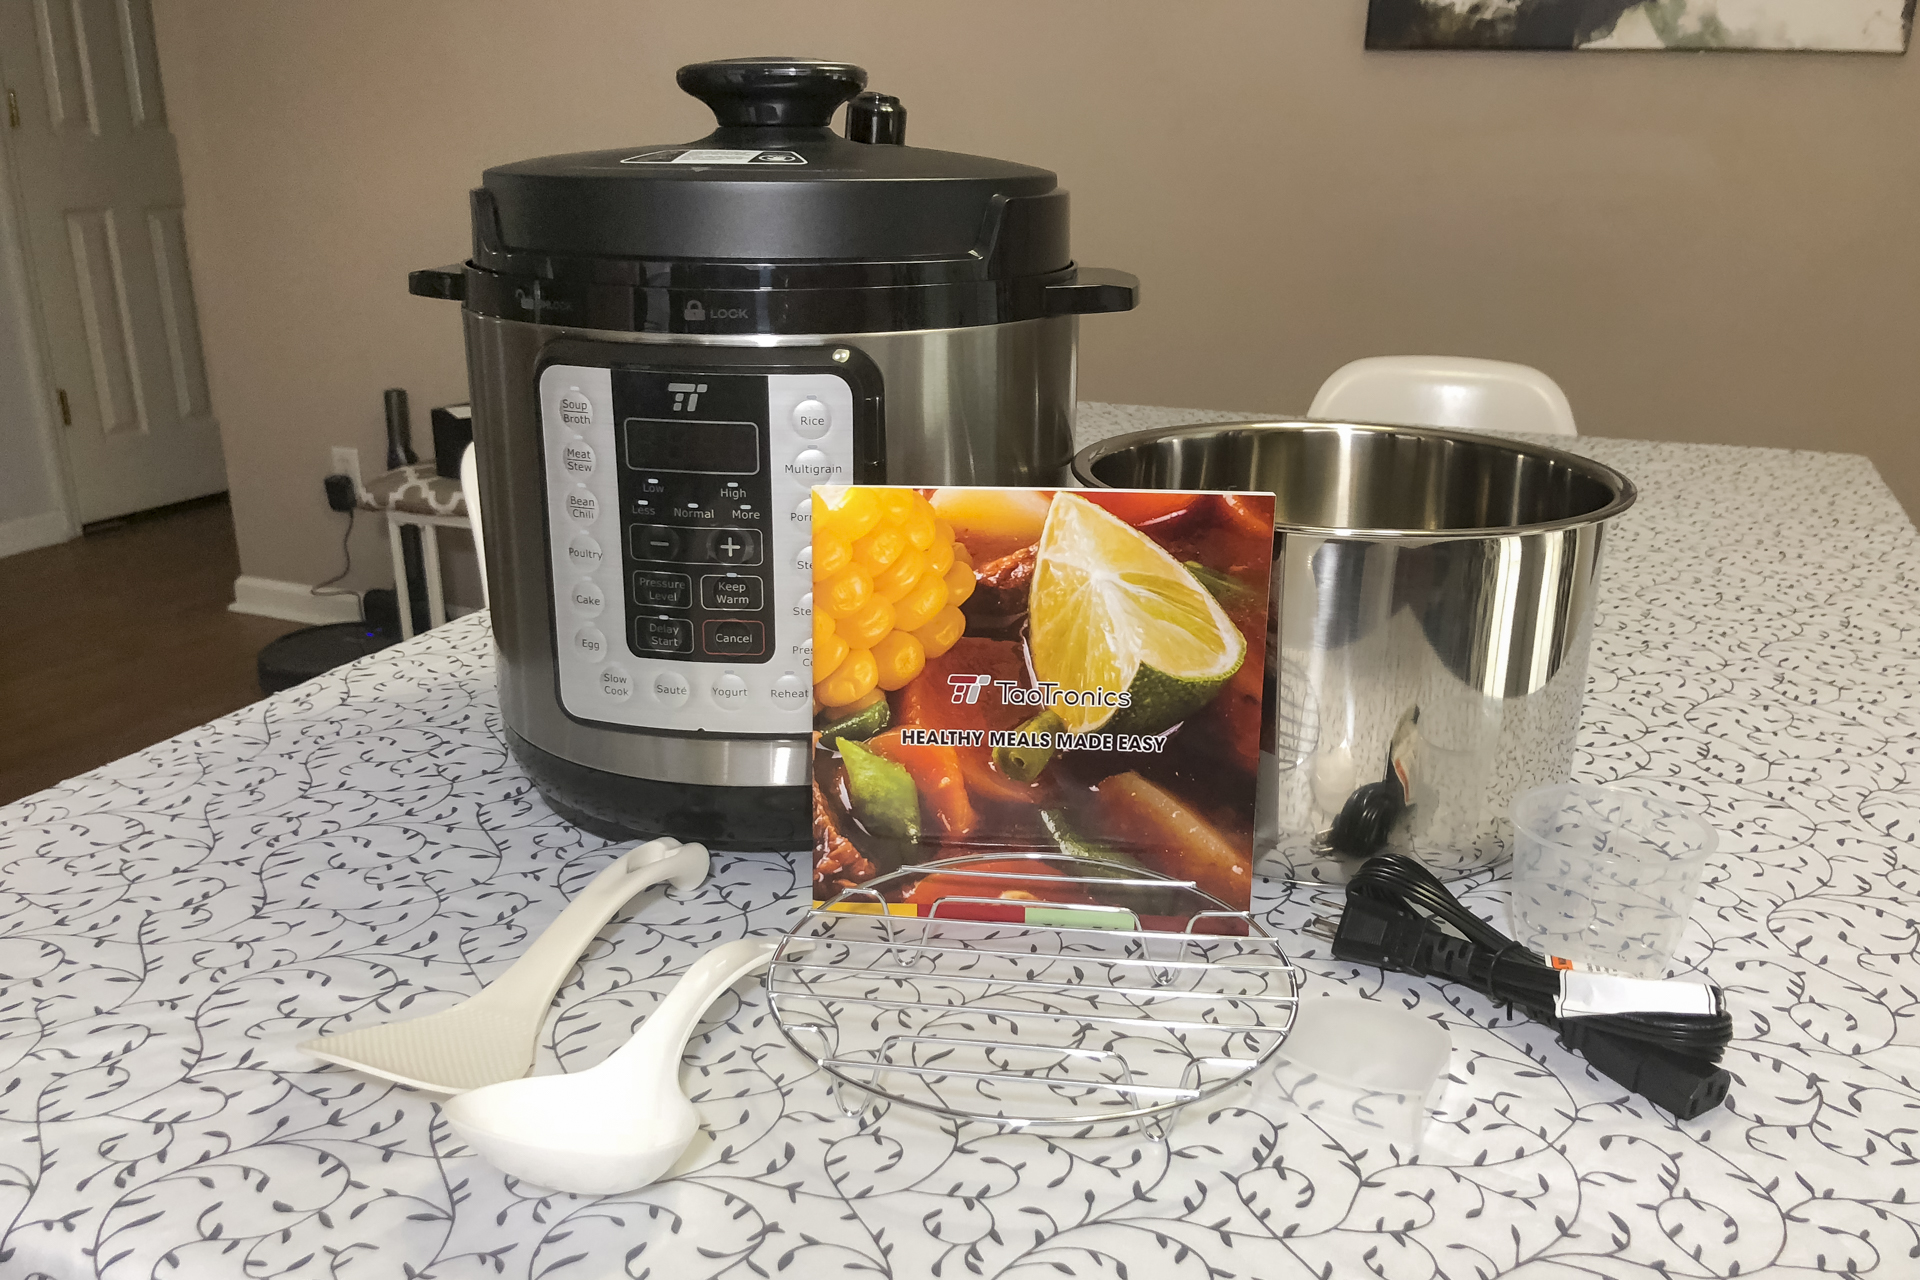 10 Accessories to Help You Get the Most Out of the Instant Pot